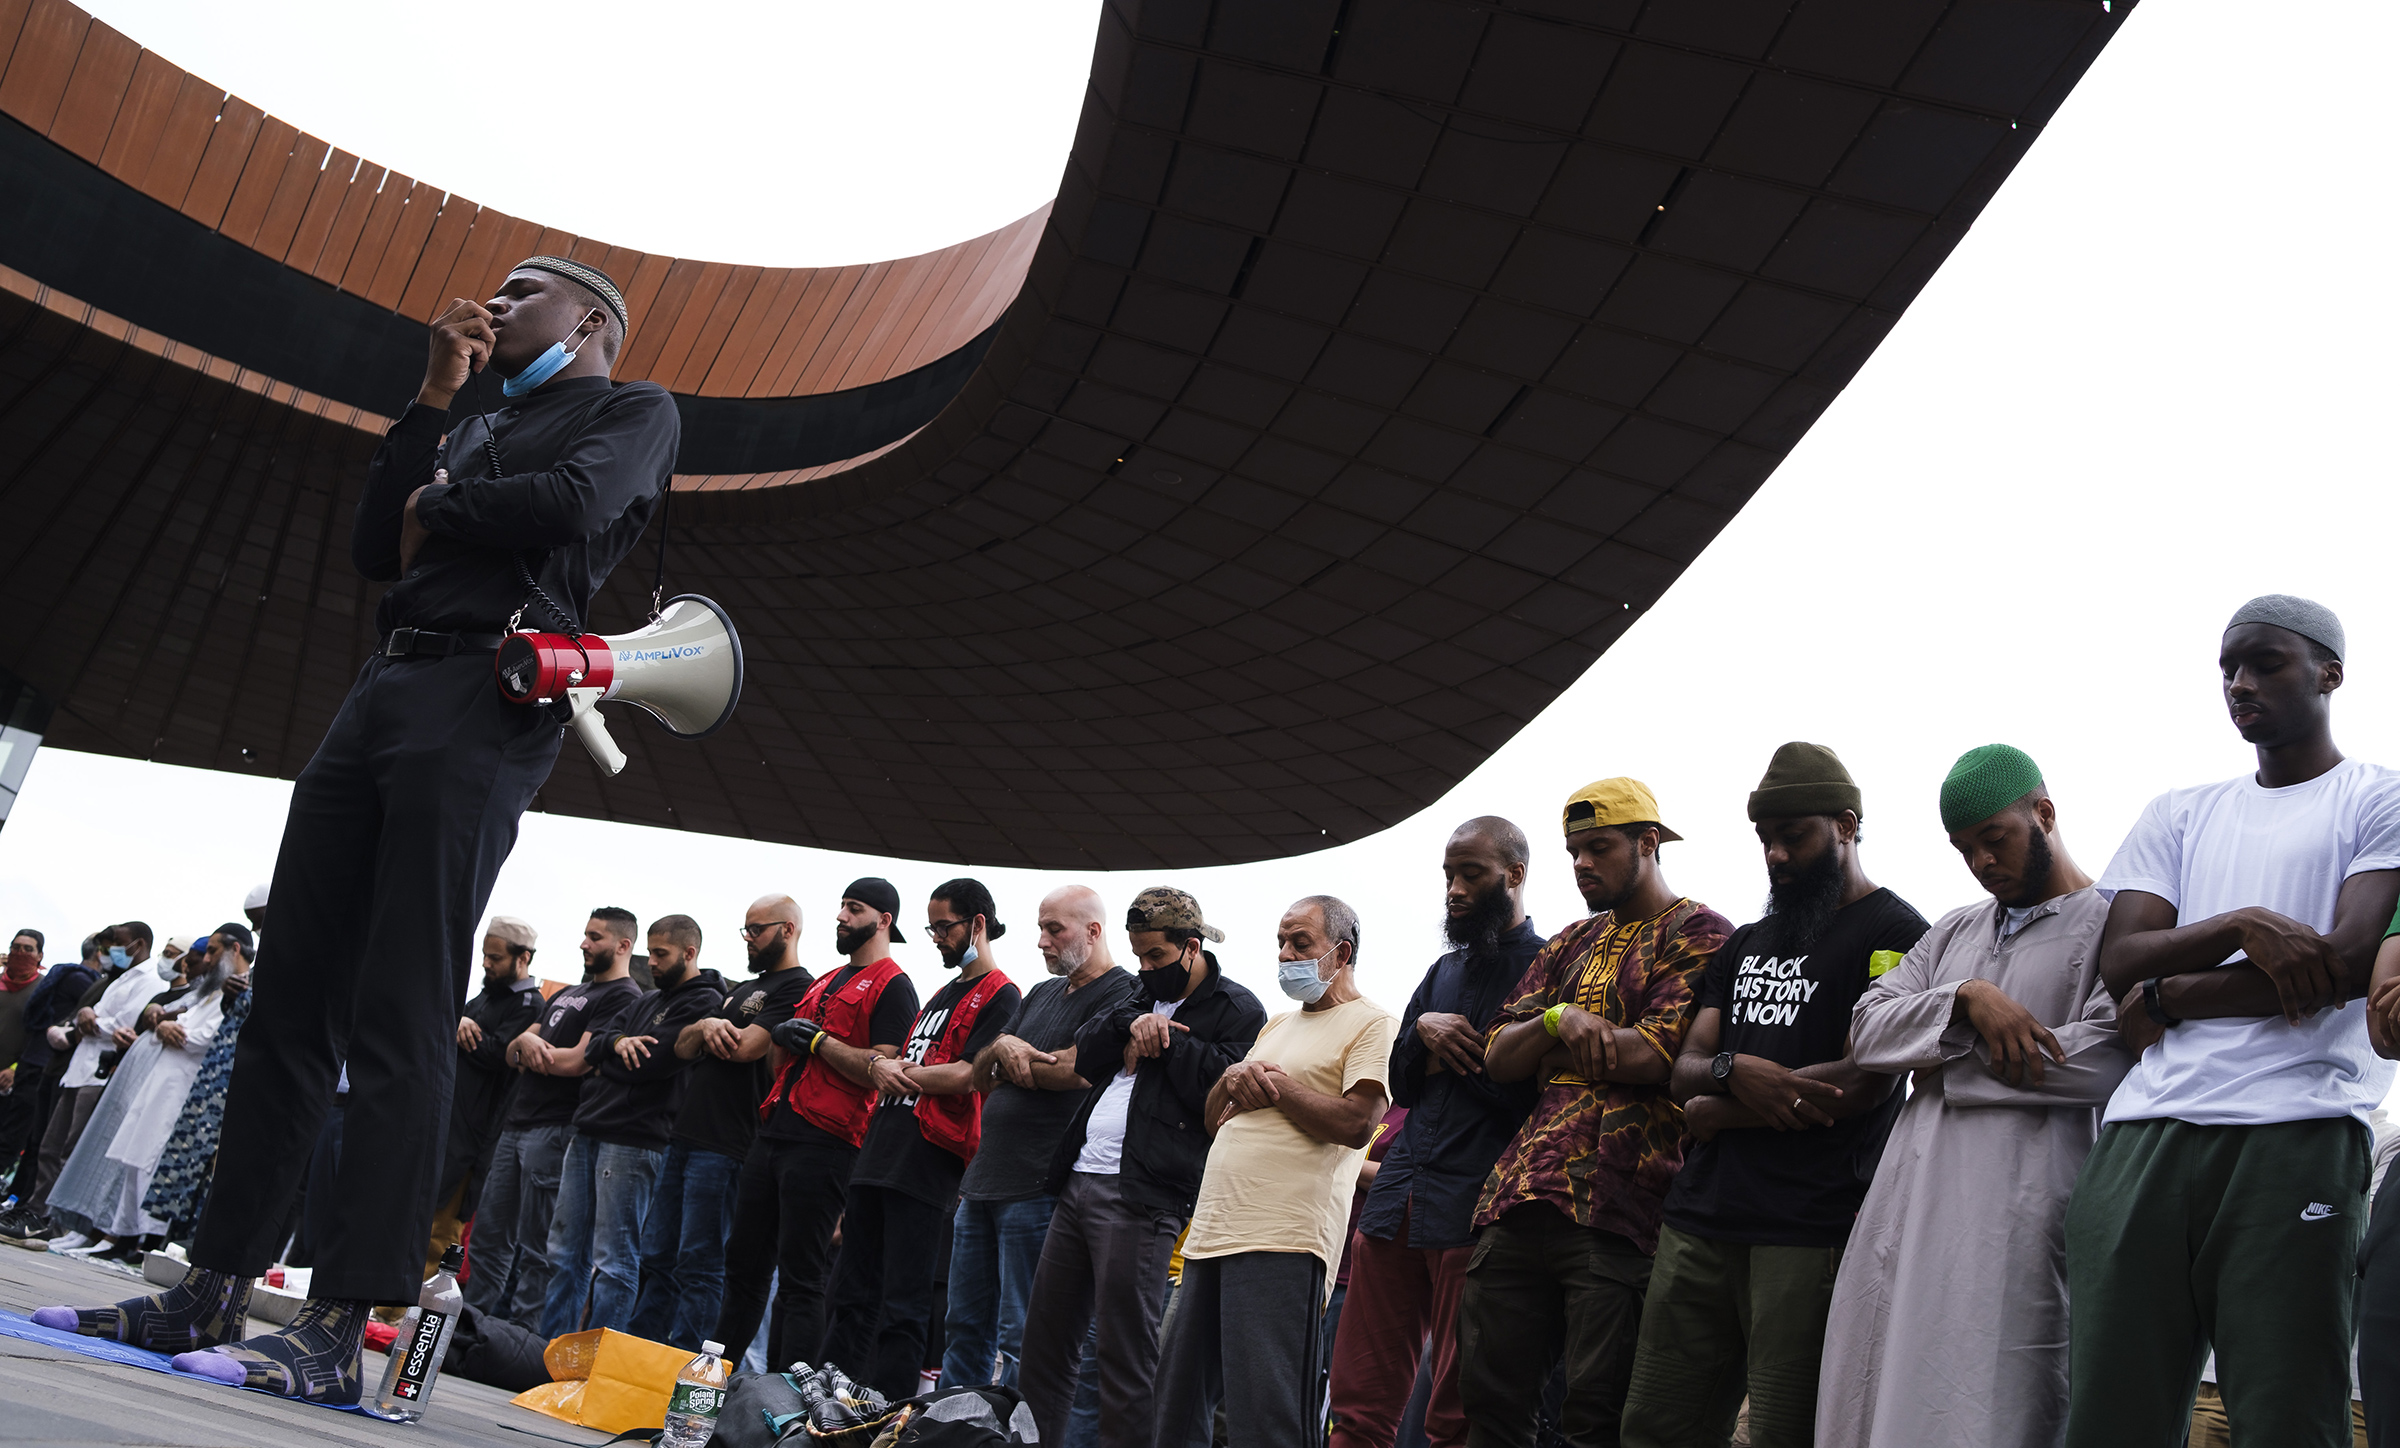 A group of Muslims gather for Friday prayers and Khutbah, and a subsequent Black Lives Matter march, outside of the Barclay's Center in Brooklyn, New York, June 5, 2020. (Justin Lane—EPA-EFE/Shutterstock)